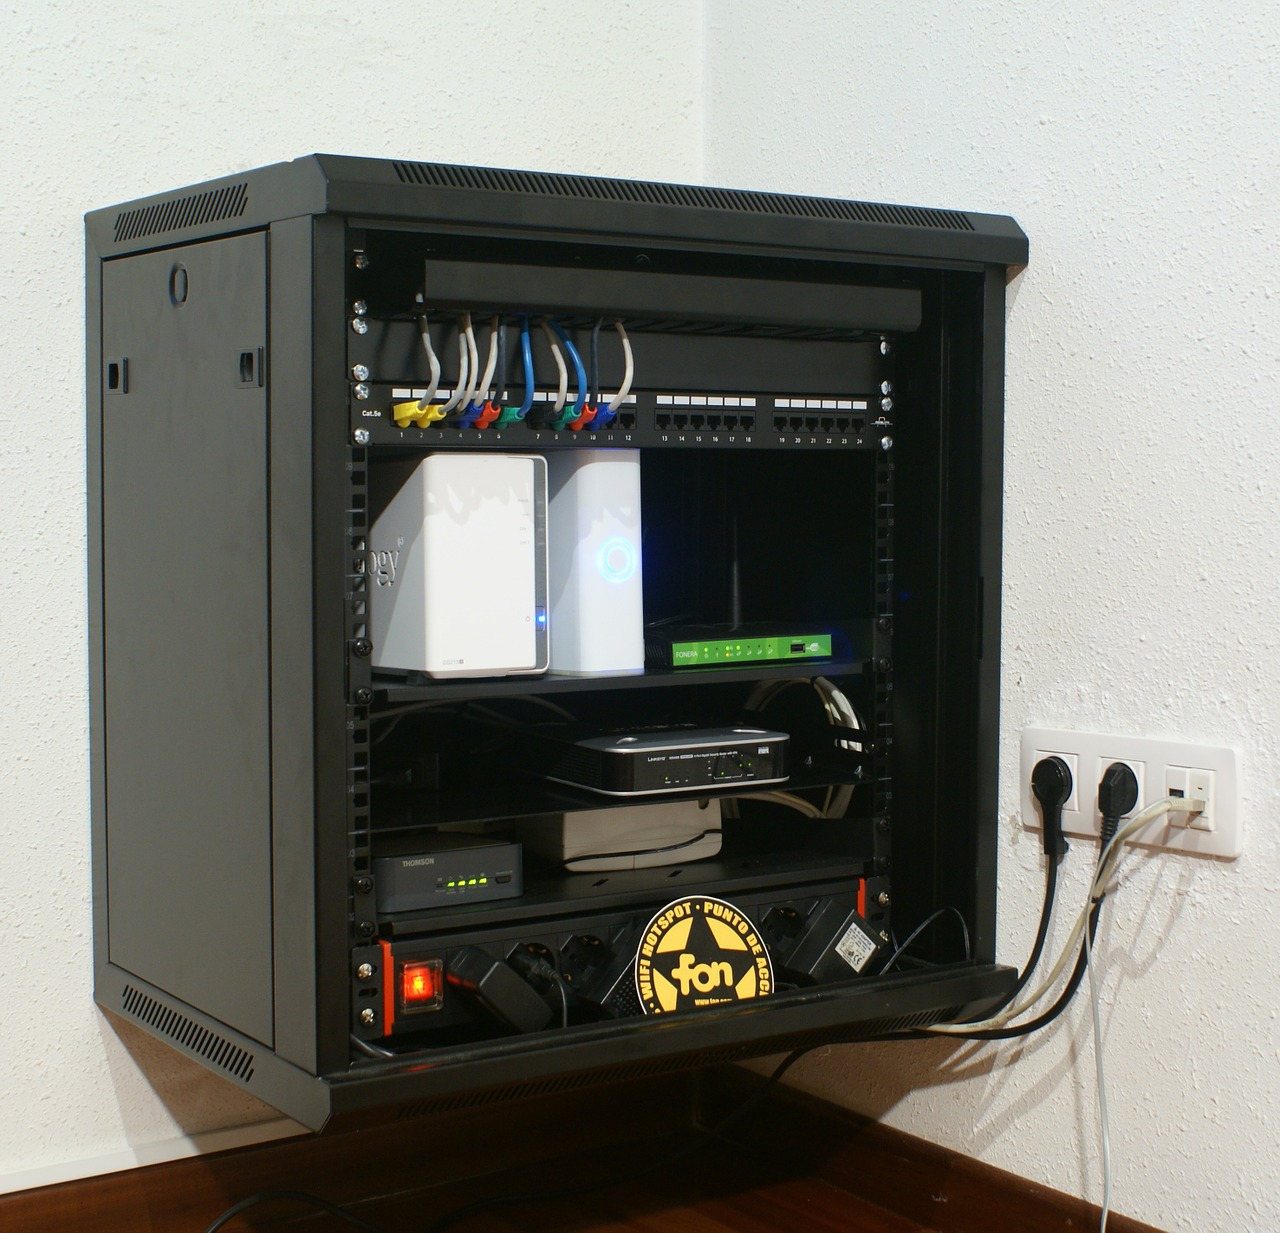 rack cabinet computing router free photo